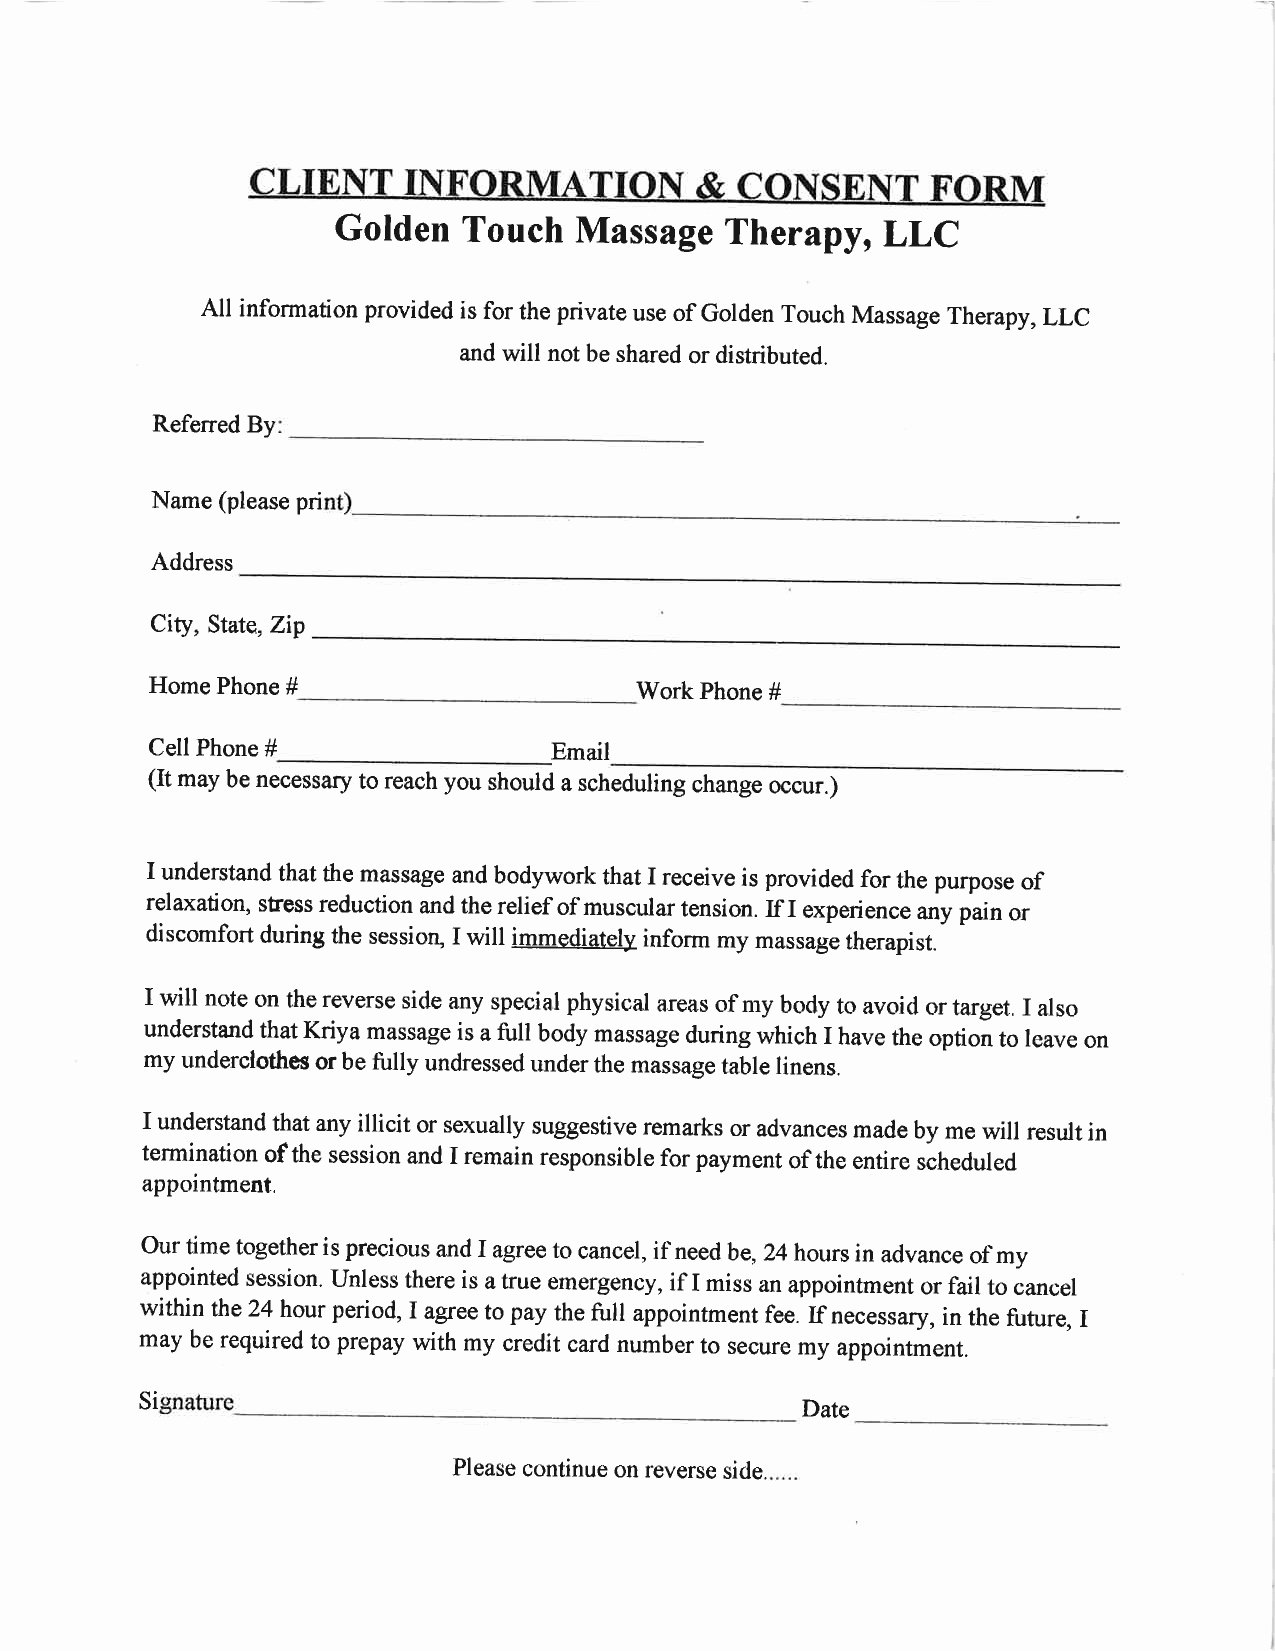 Counseling Intake form Template Fresh Golden touch Massage therapy Client Intake form